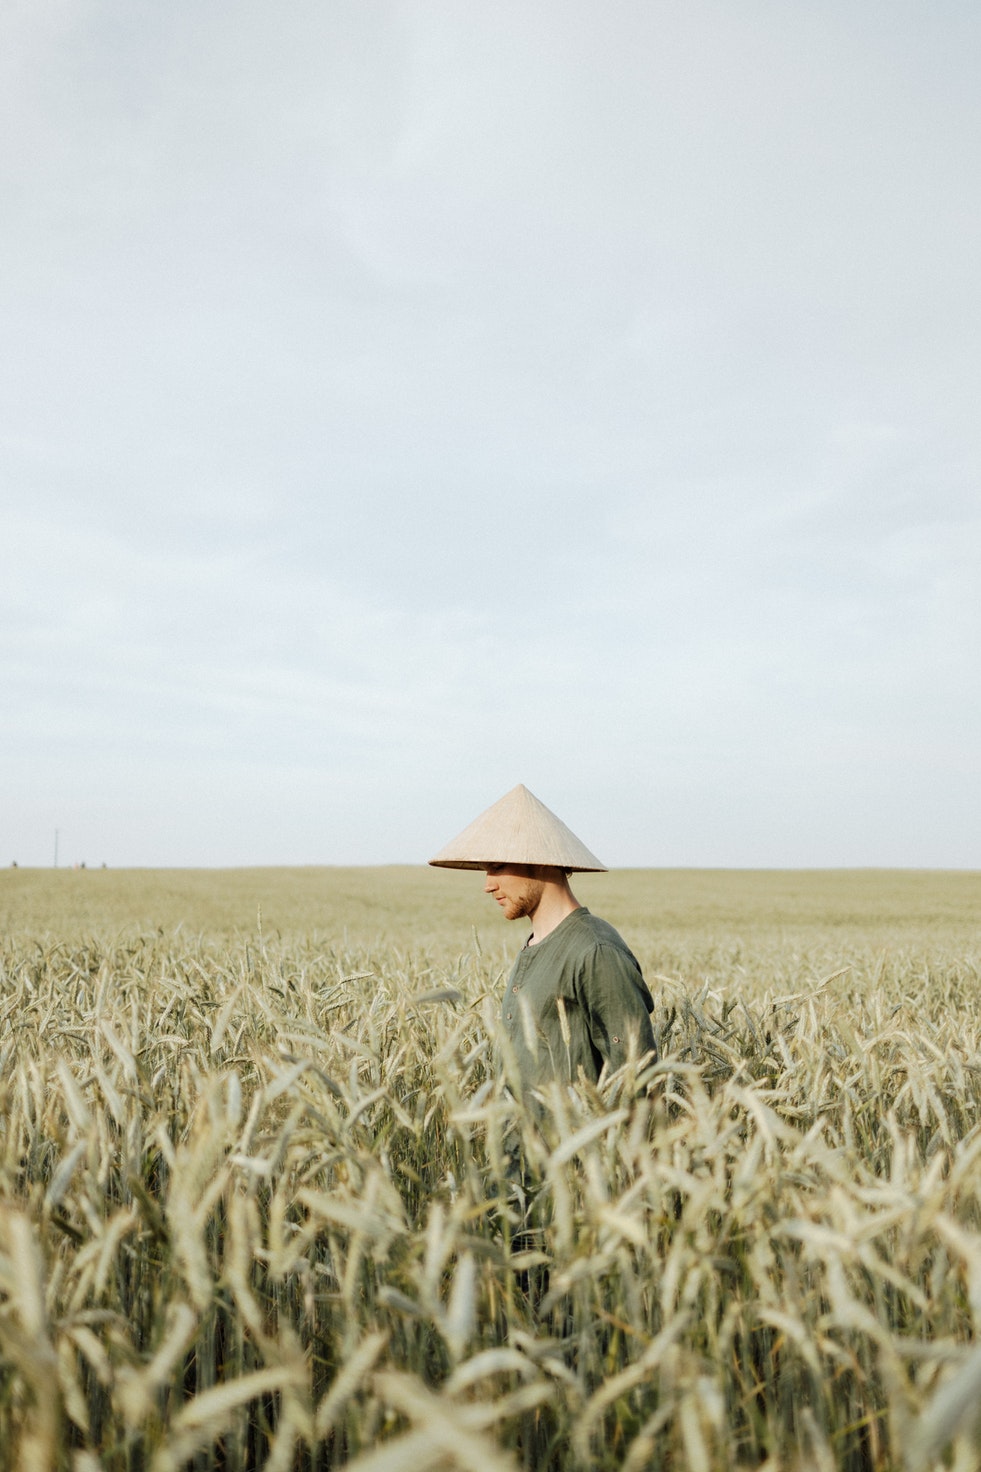 Man with Hat is Standing in the middle of a Wheat Field